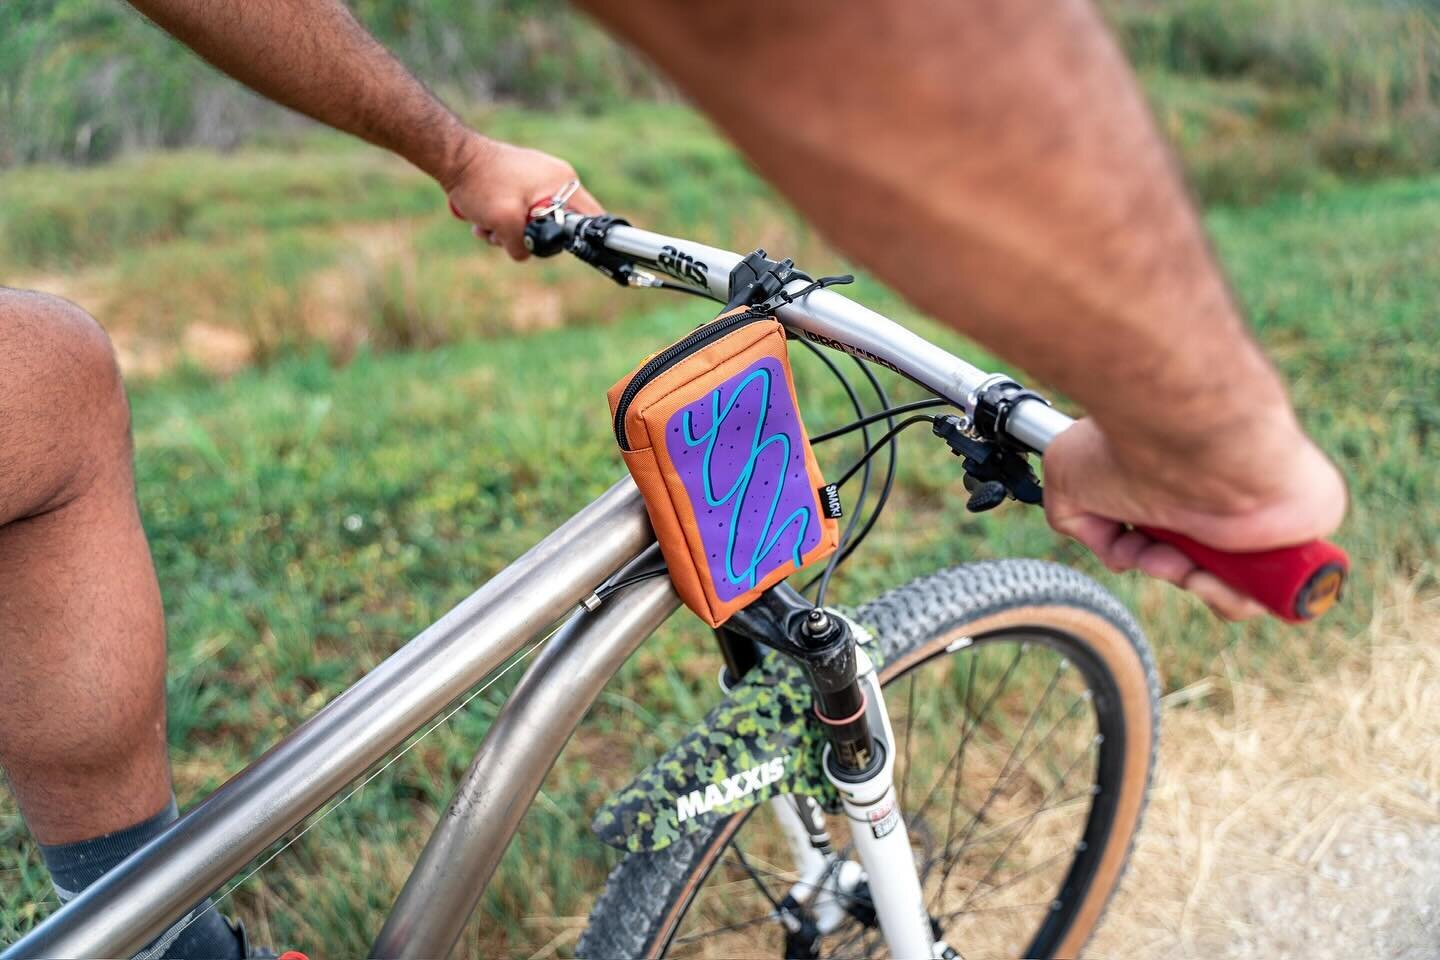 Carb up with the top tart bag and get the wheels rolling! Weekend snack miles await&hellip;

#SnackSocialClub